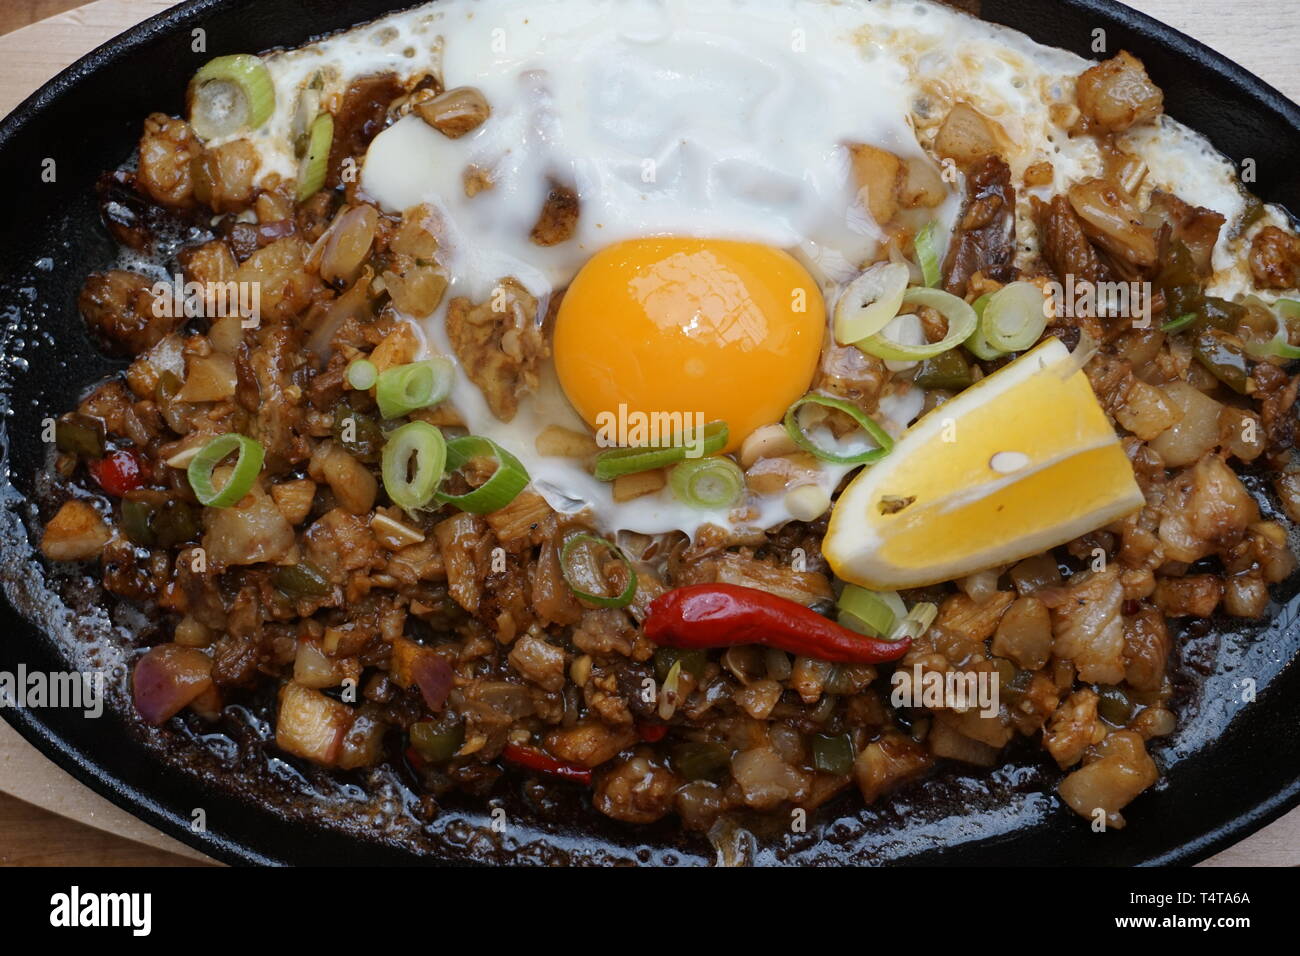 Delicious Pork sisig sizzling mince pork Filipino food with raw egg cooking hot on clay pot tray with lemon slice and fresh red chilies Asian cuisine Stock Photo